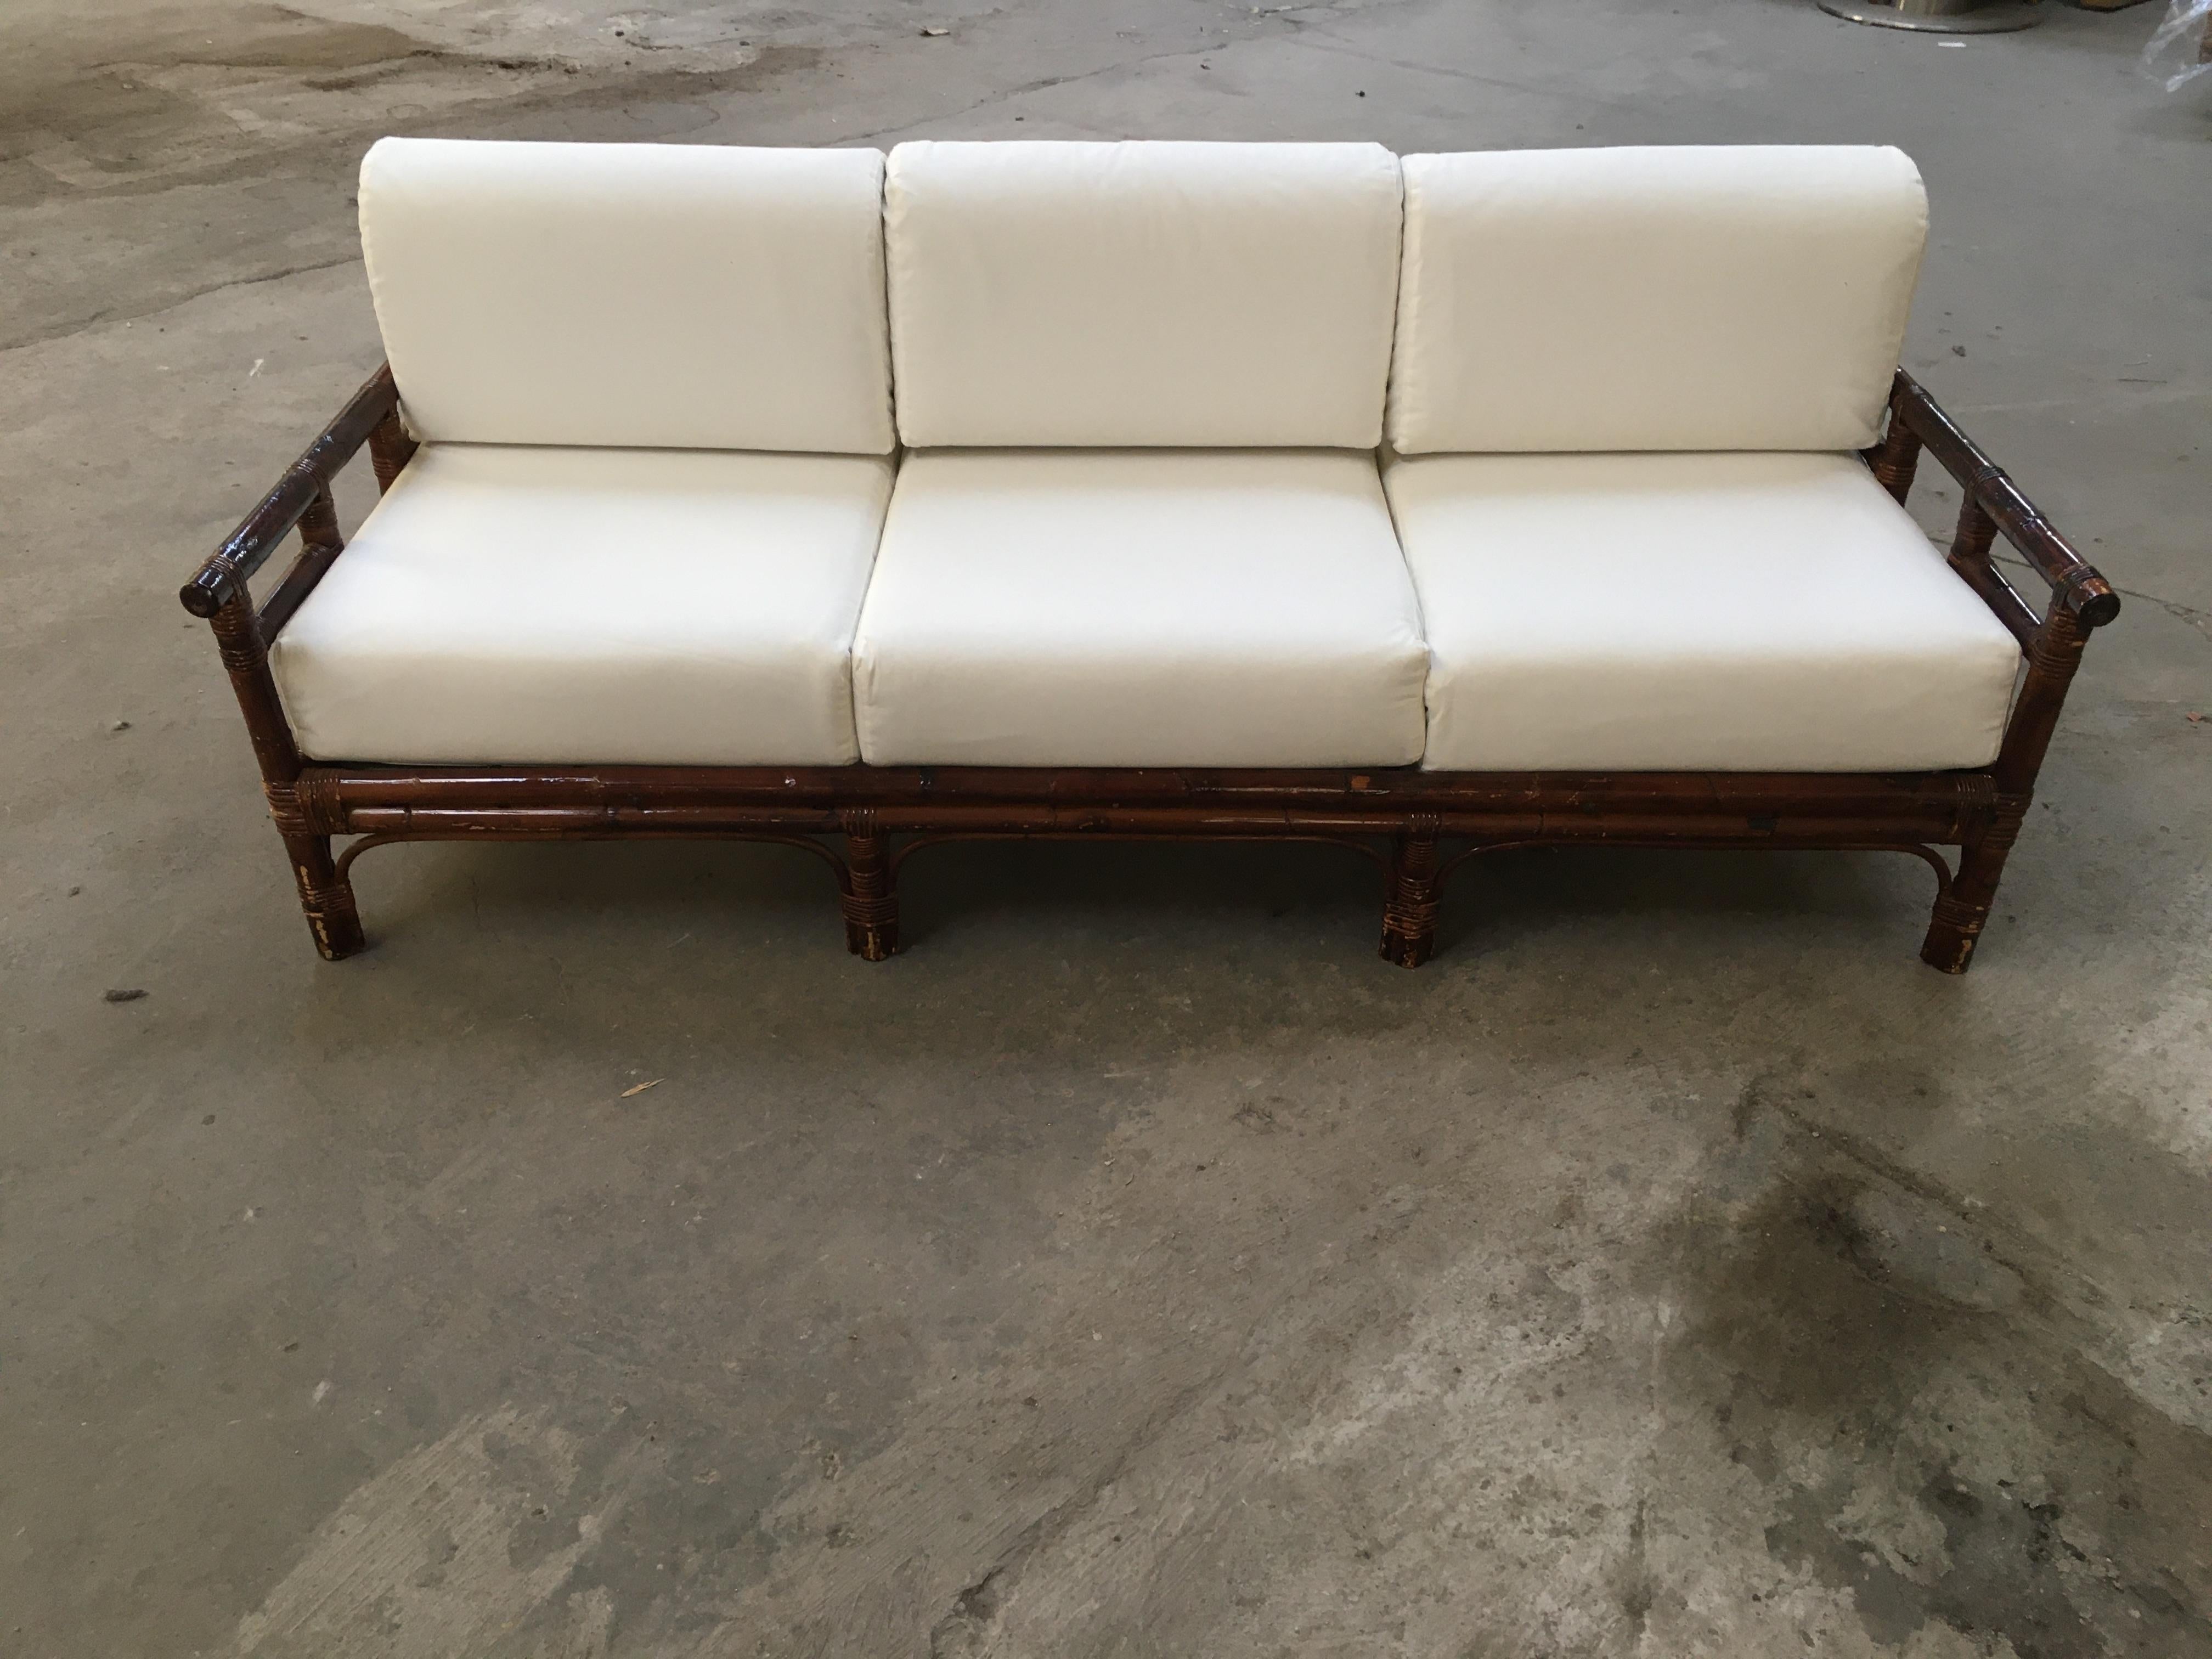 Mid-Century Modern Italian three-seat bamboo sofa with reupholstered cushions, 1970s
The cushions have been covered with white cotton to give the chance to recover them with the right selected fabric.